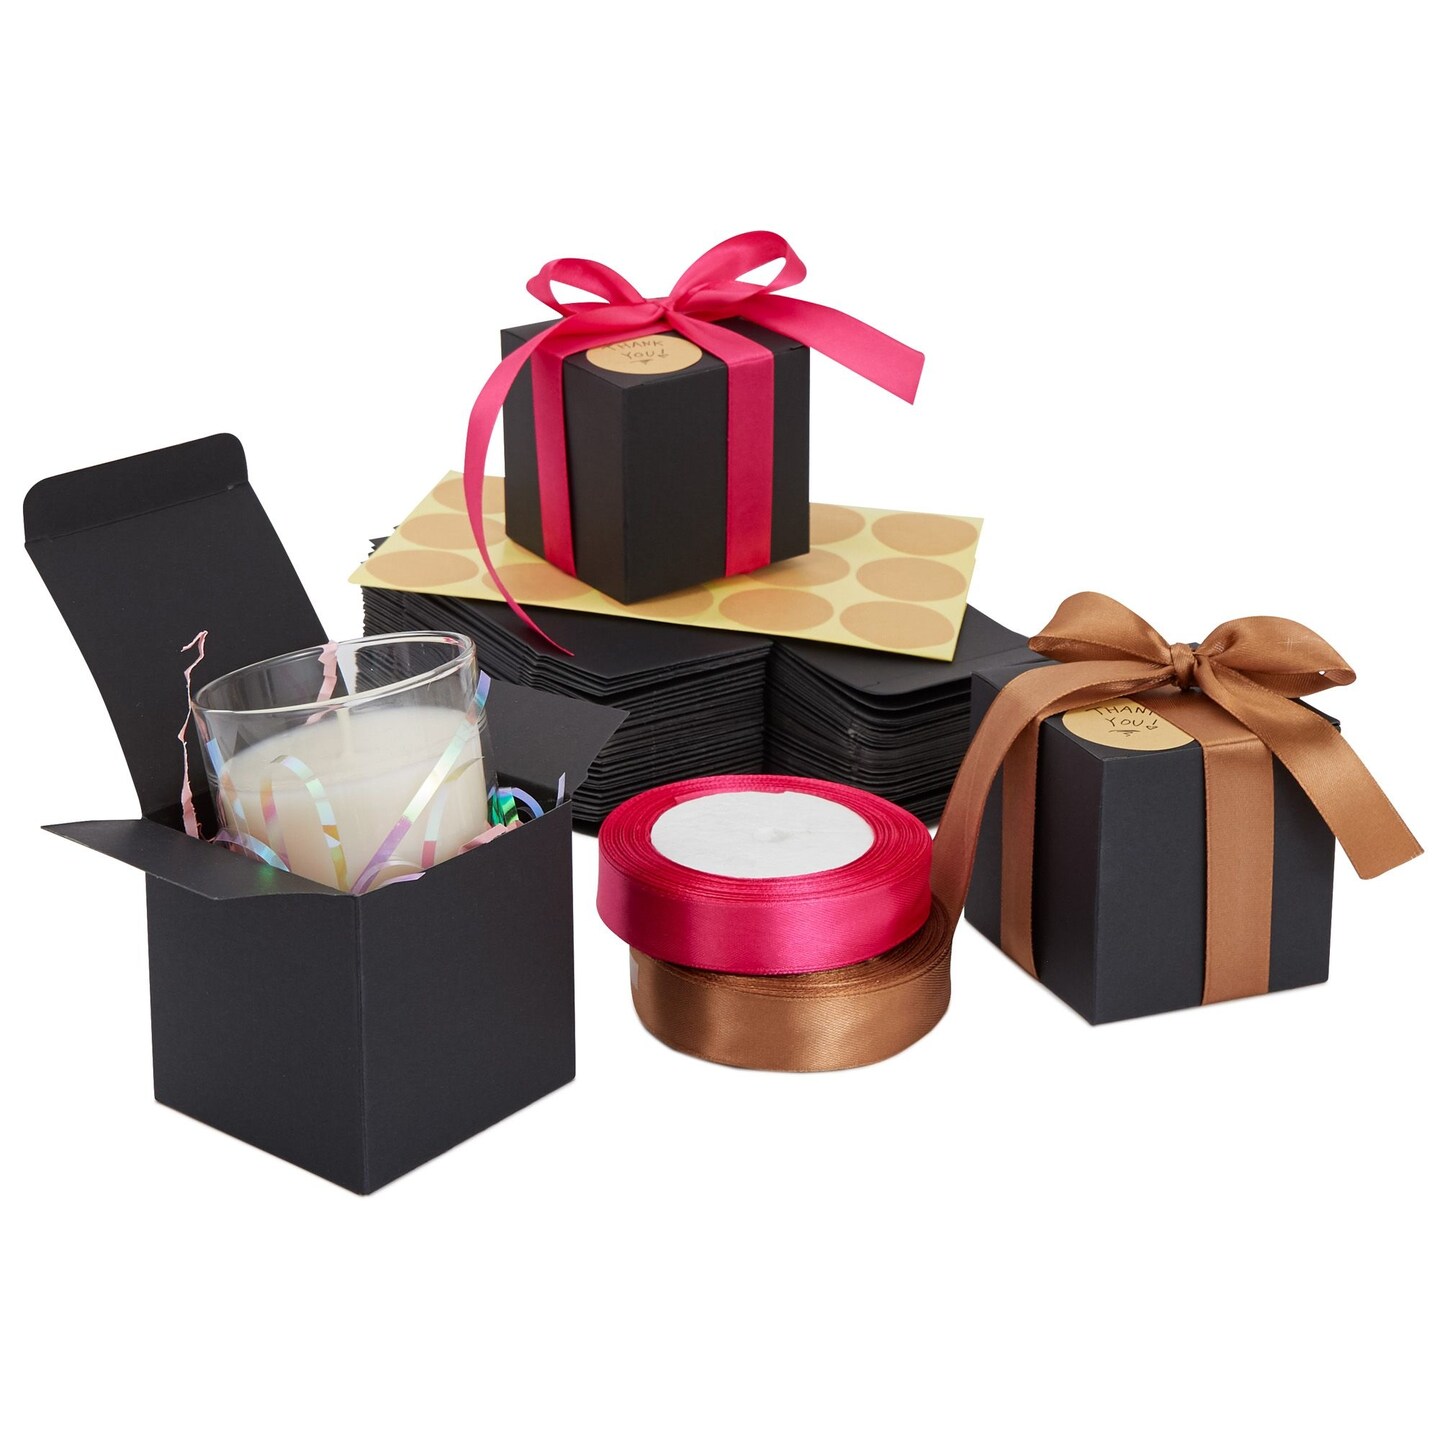 50-Pack Black Kraft Paper Gift Boxes, 3x3x3-Inch Boxes for Party Favors with 2 Rolls of 72-foot x 0.75-Inch Satin Ribbon in 2 Colors with 50 Round Gold 1.5-Inch Stickers